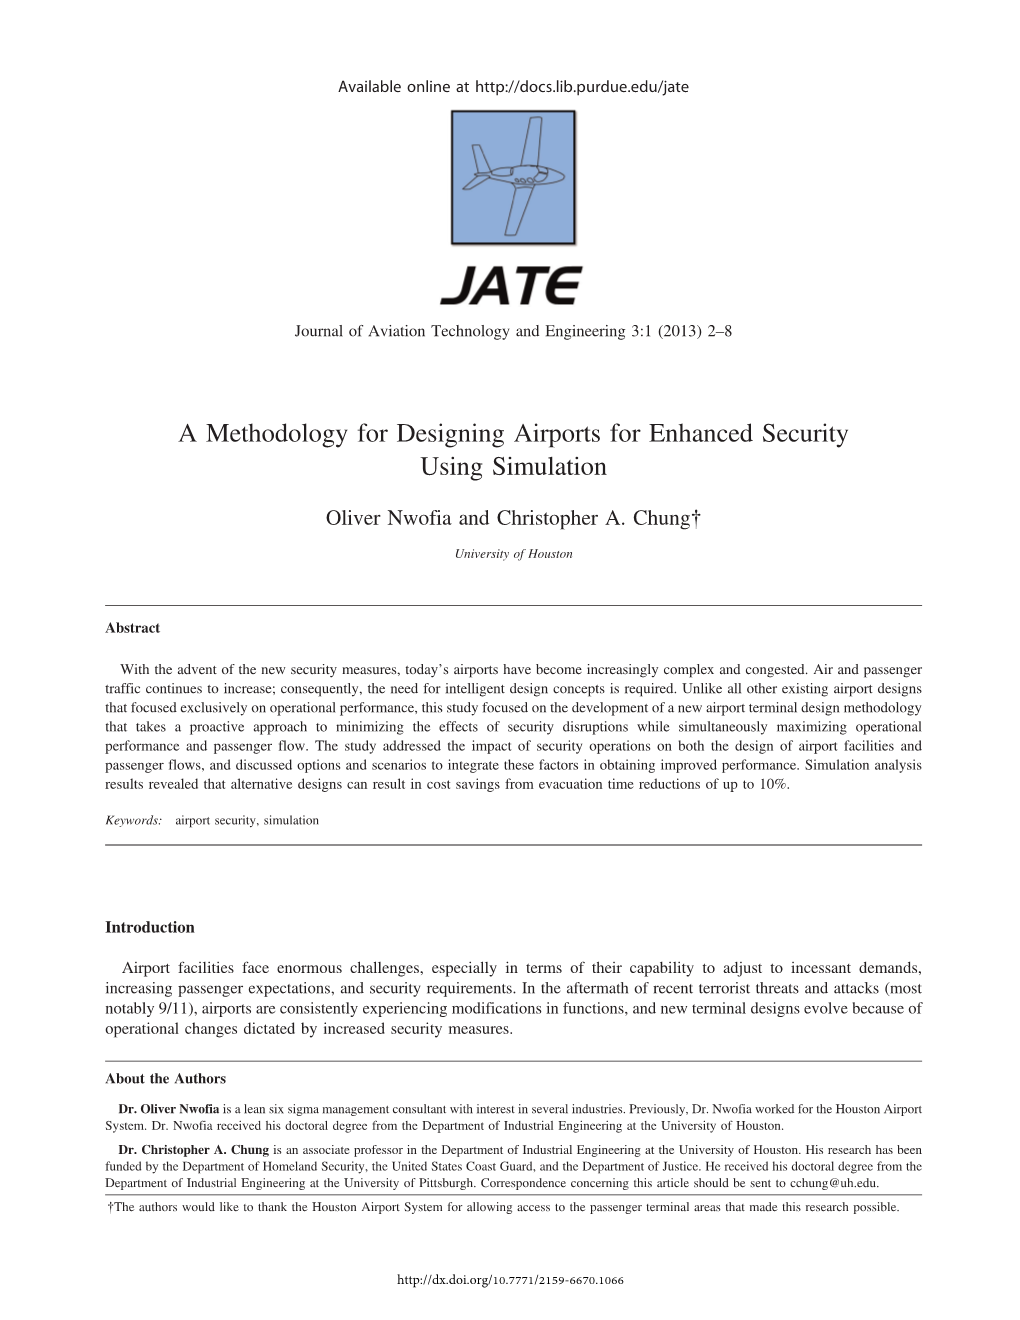 A Methodology for Designing Airports for Enhanced Security Using Simulation